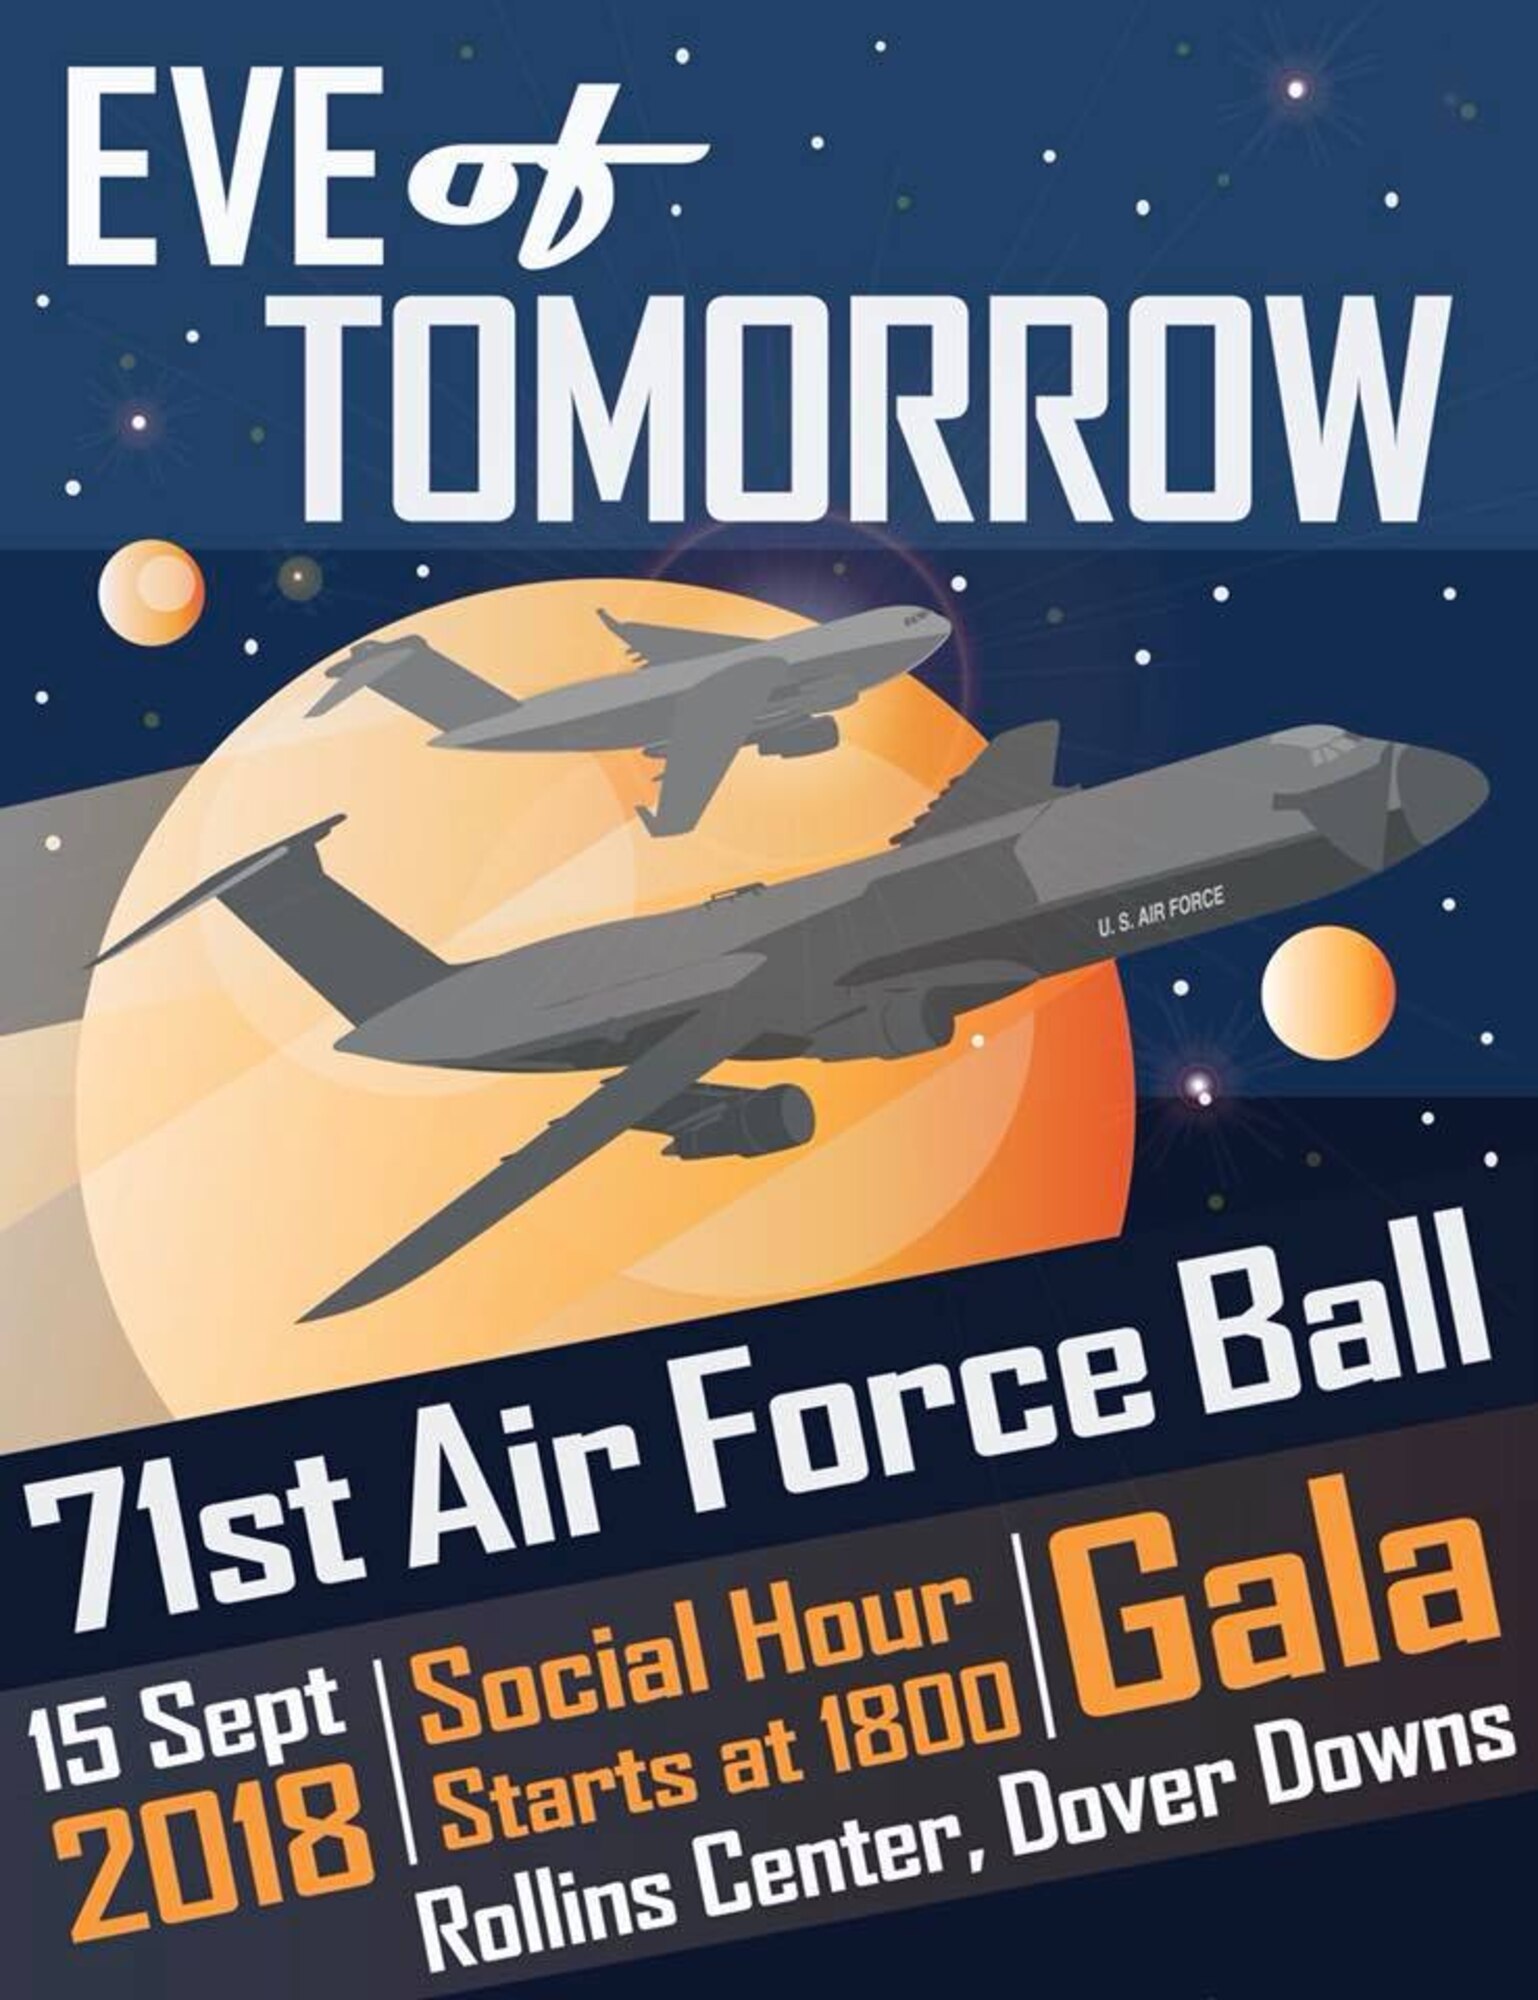 The 71st Air Force Ball is scheduled for Sept. 15, 2018, at the Rollins Center, Dover Downs, Del. The event's theme is the "Eve of Tomorrow," encouraging Airmen to look toward the future by emphasizing innovation and technology, and building on the strong foundation and proud service of the defense organization. (Courtesy graphic)